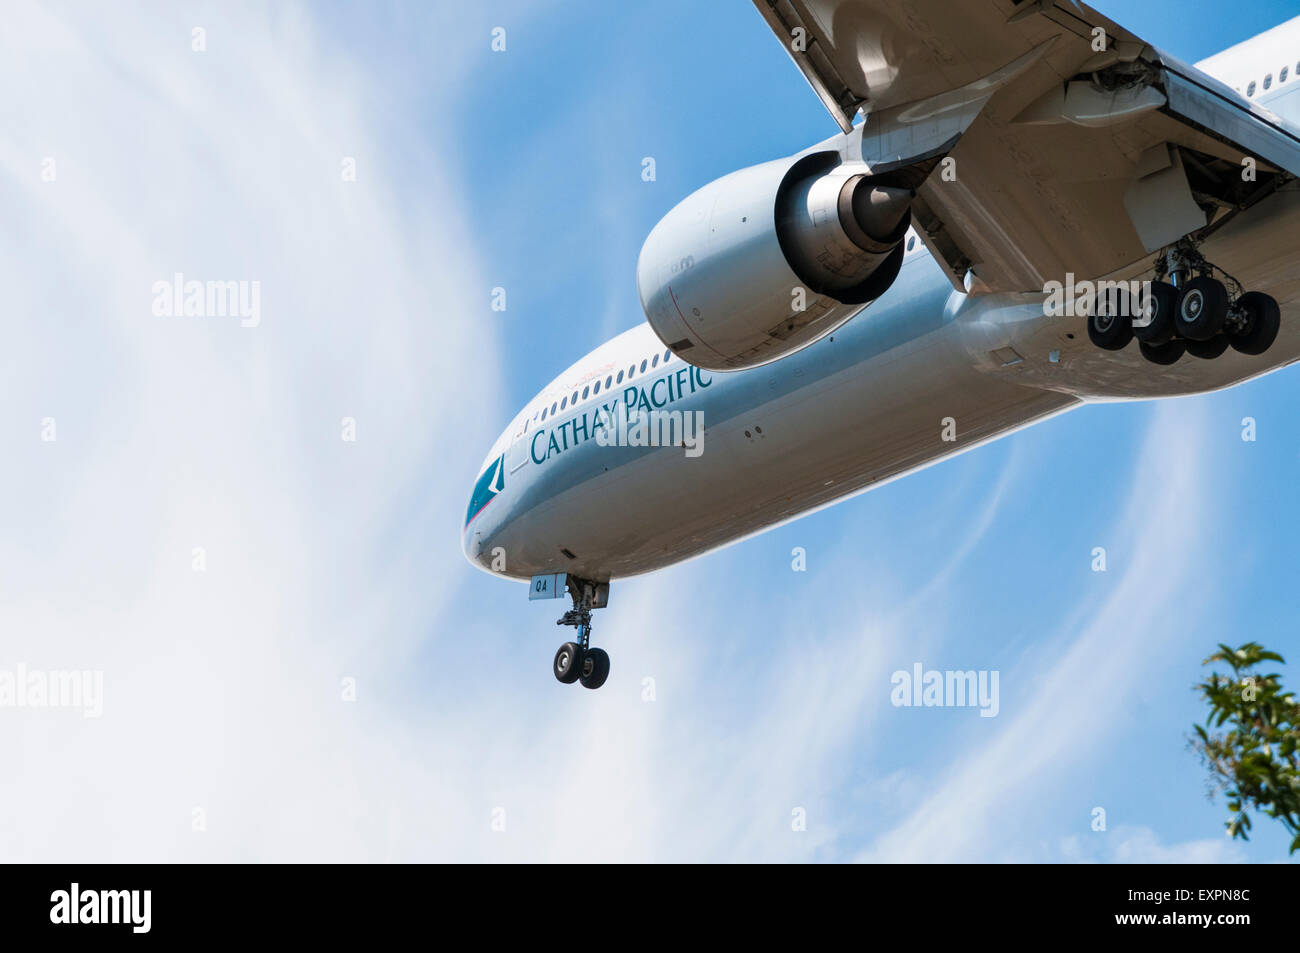 Cathay Pacific Boeing 777 aeroplane flying overhead on approach to land at London Heathrow Stock Photo